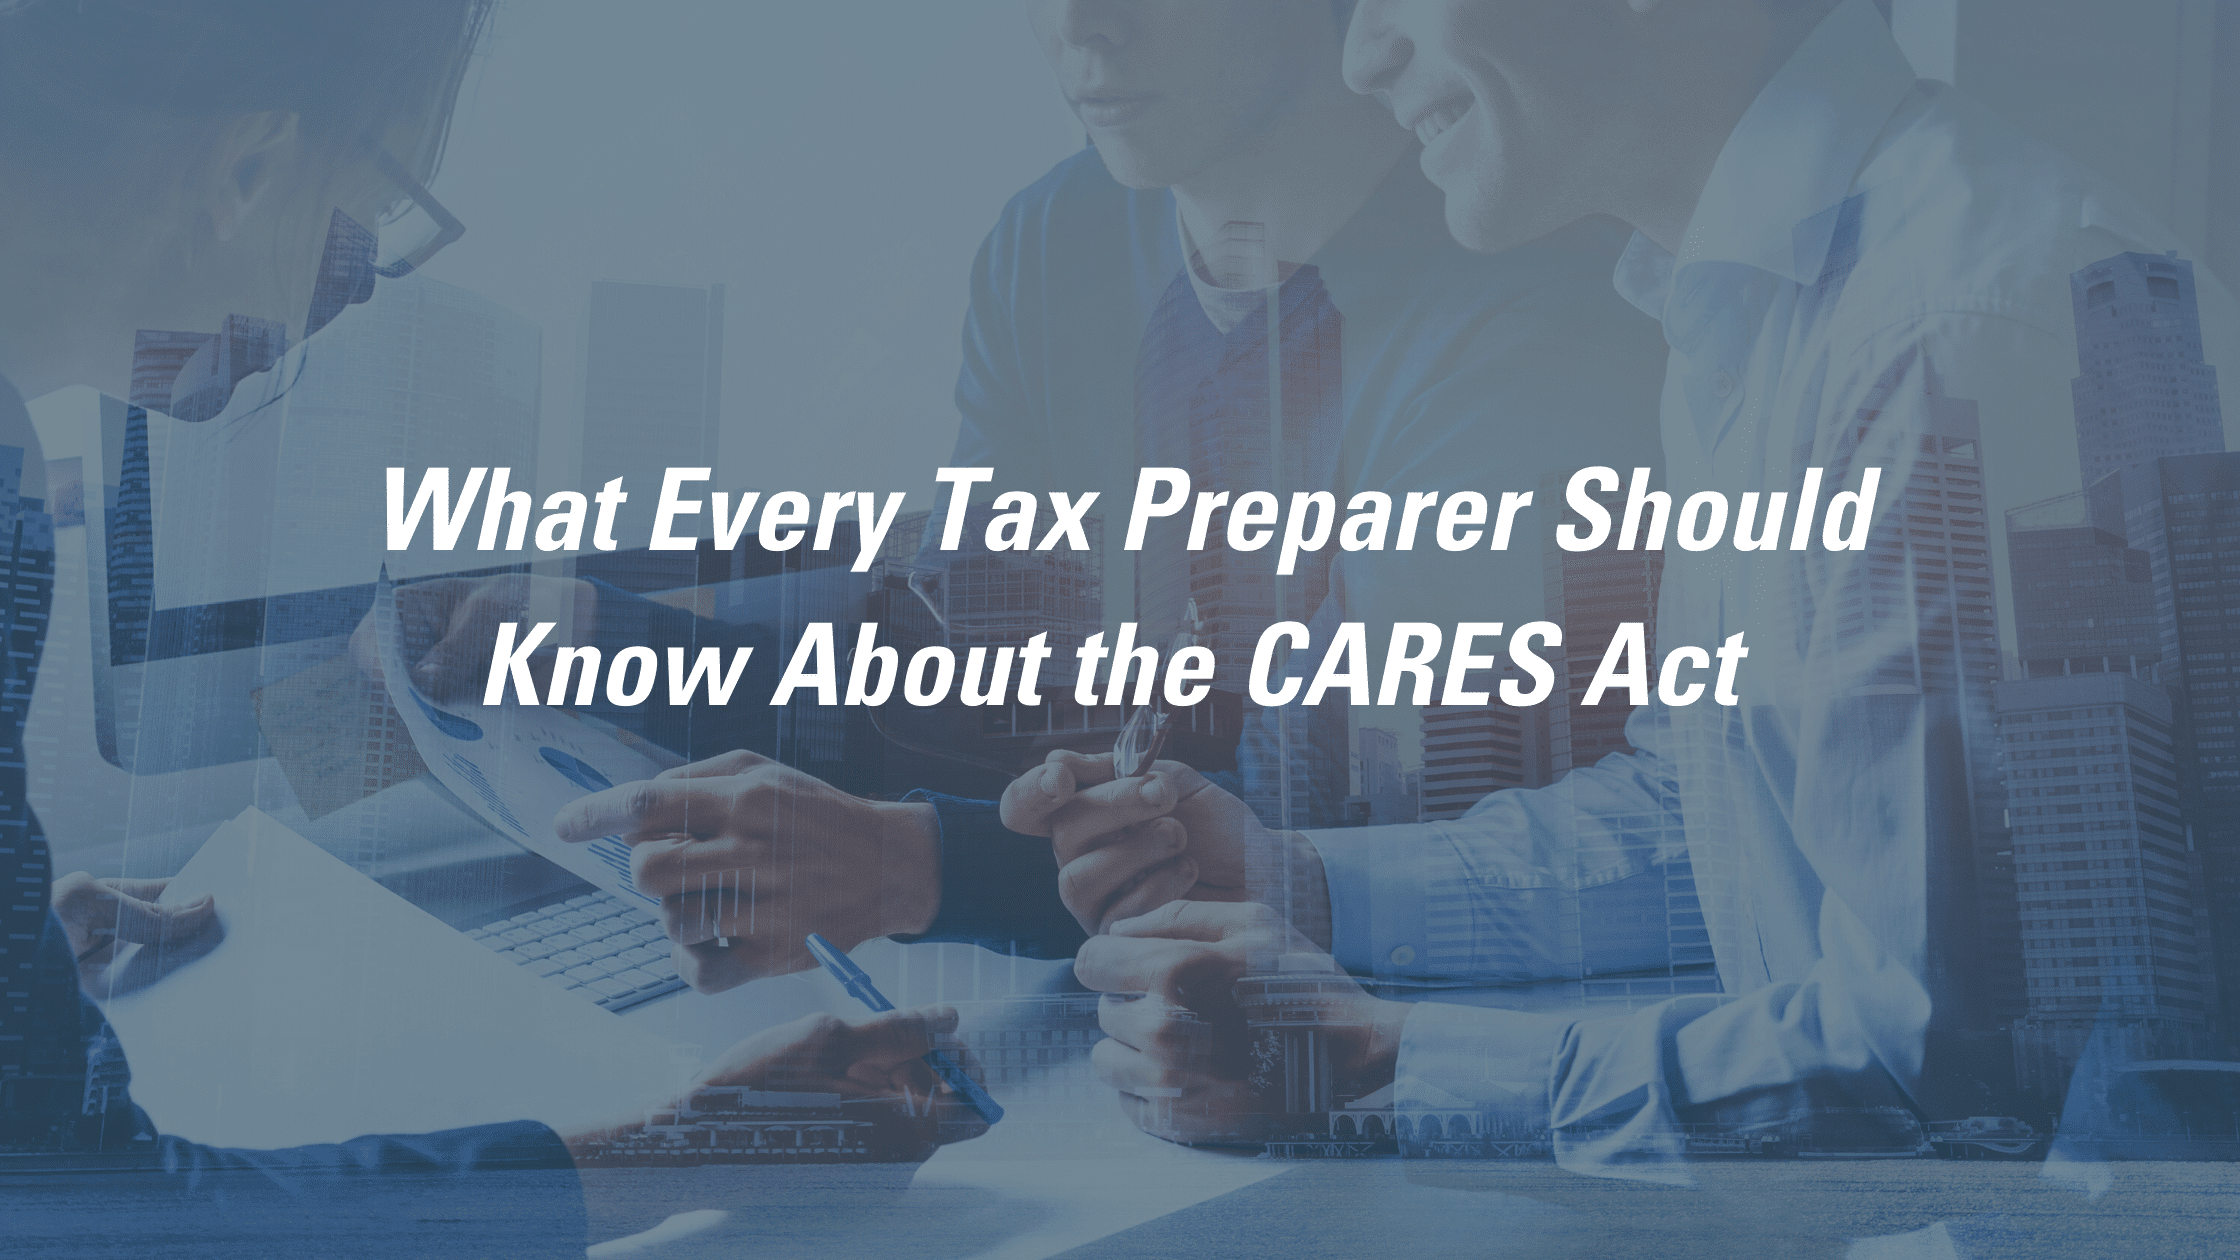 The CARES Act for Tax Preparers